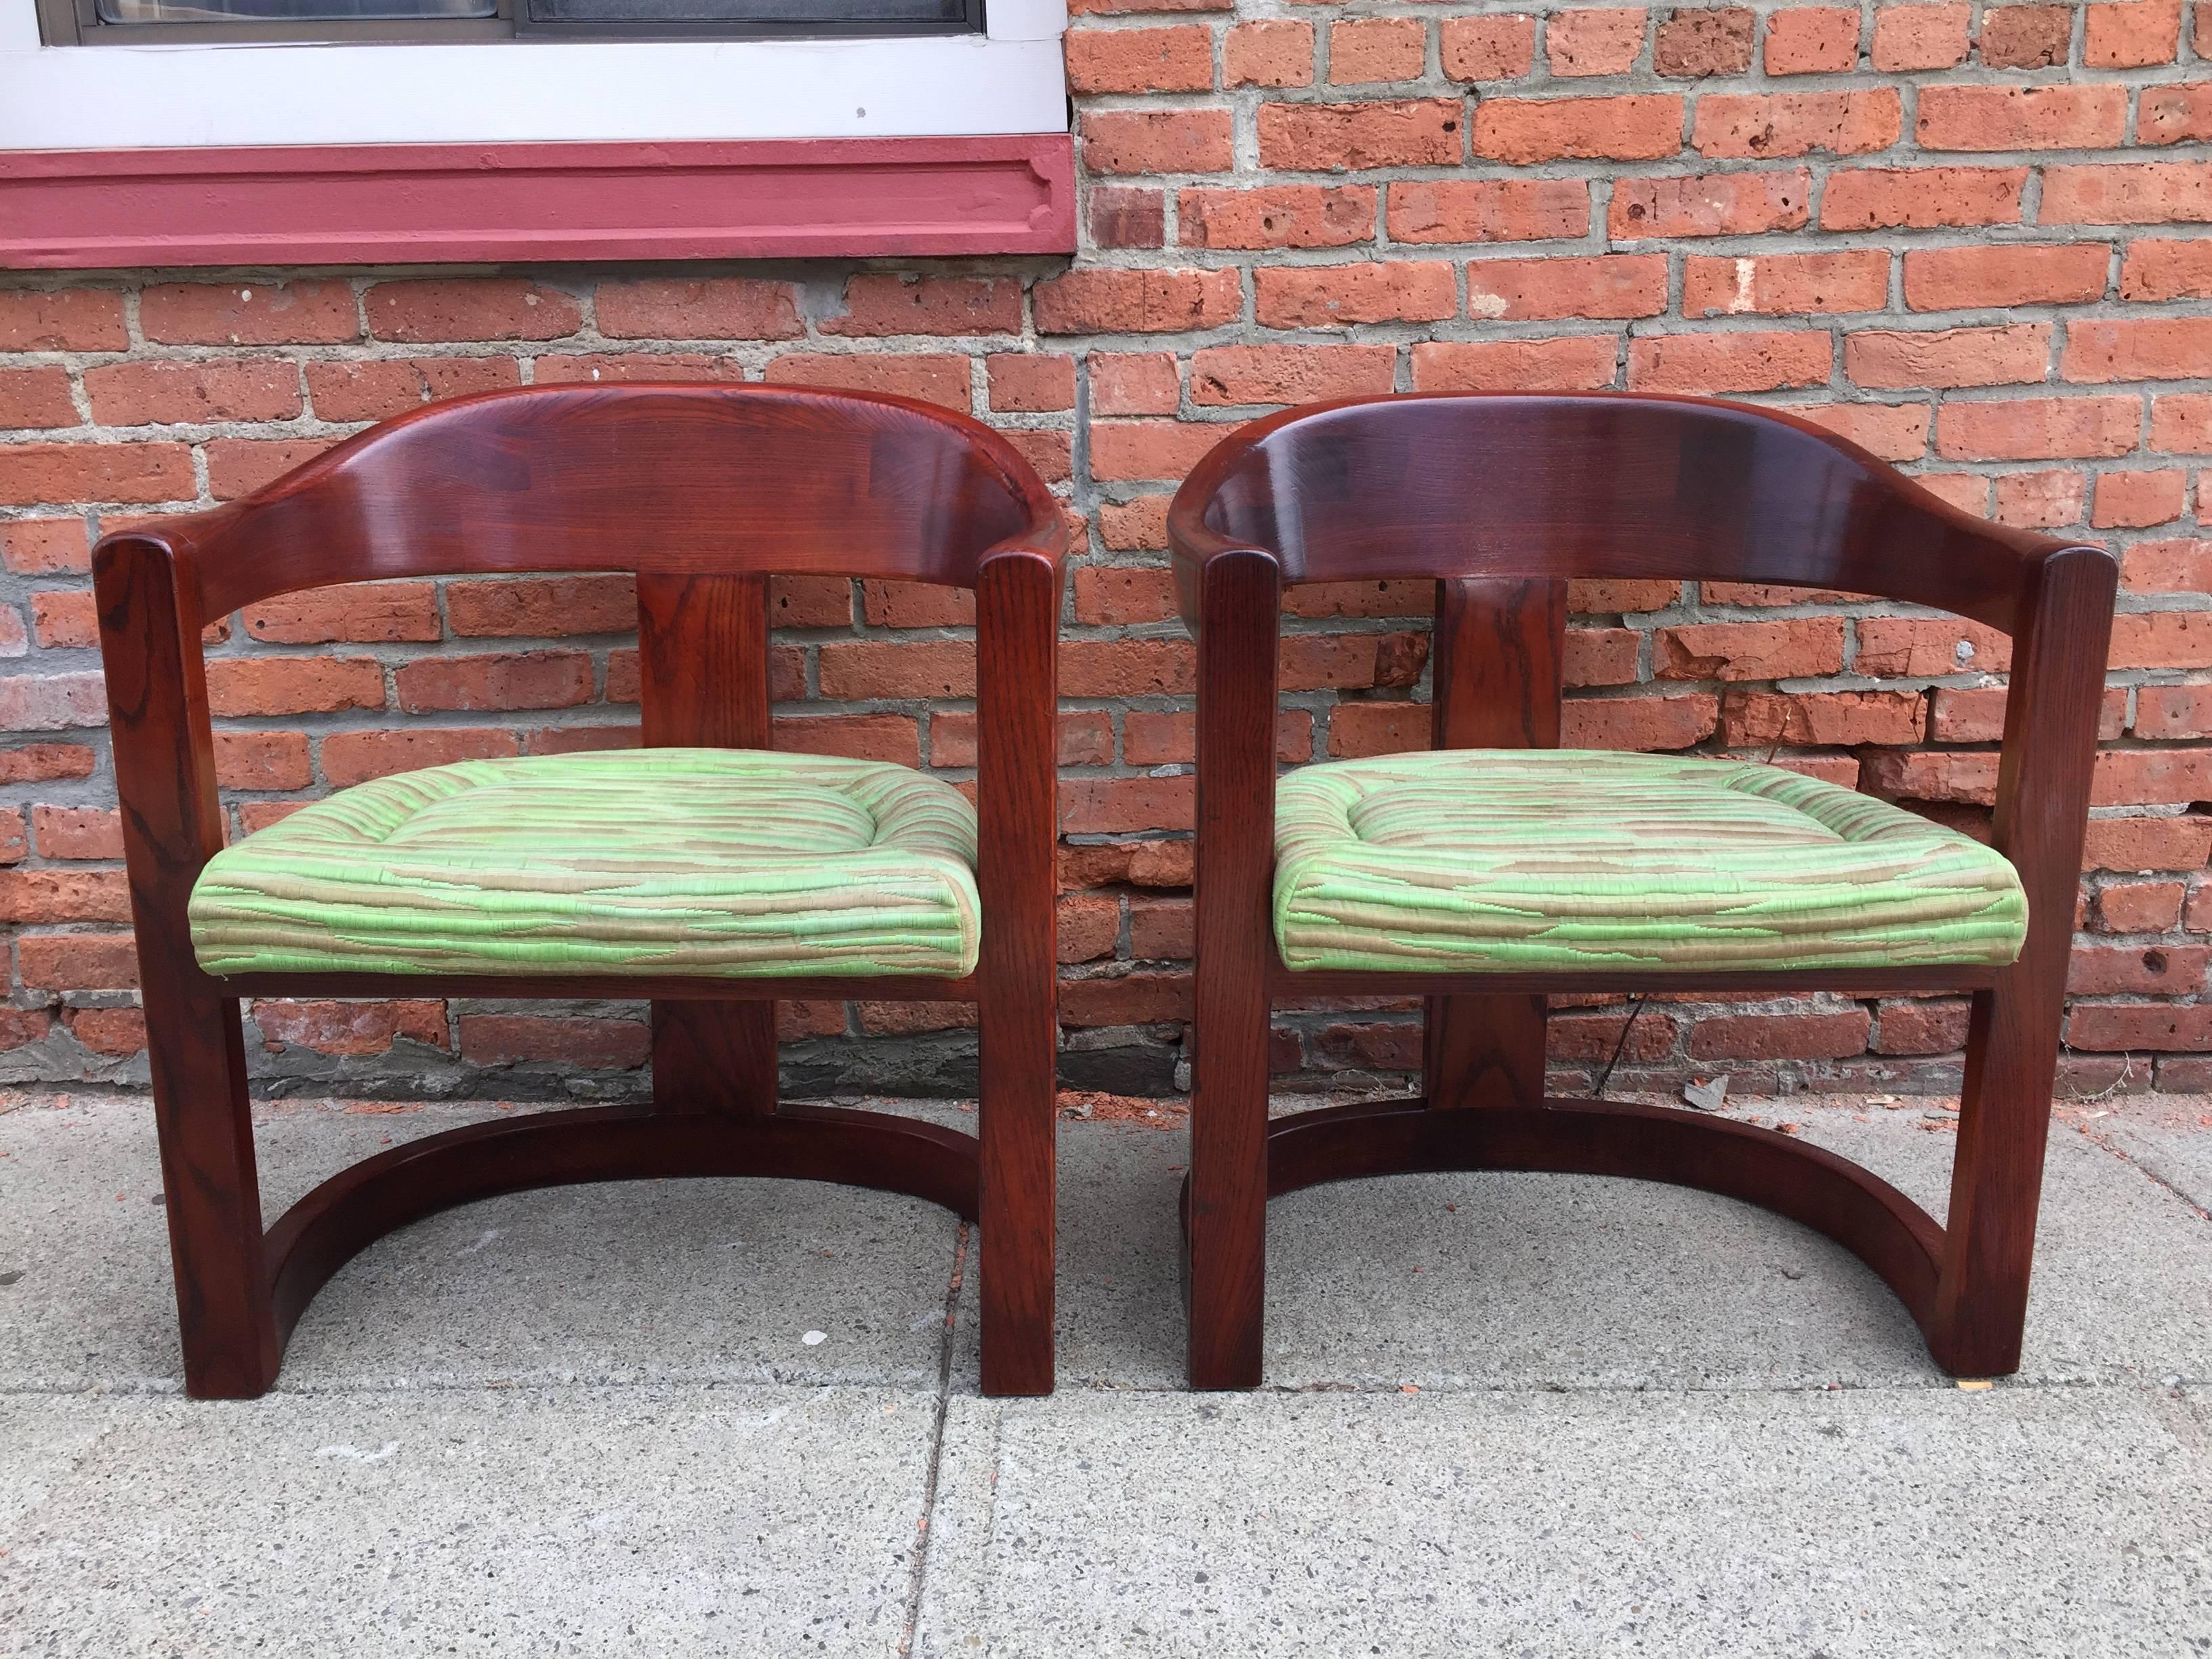 Original oxblood red mahogany stained chairs with complimentary red and green silk fabric seats. Wonderful mix of color and form.